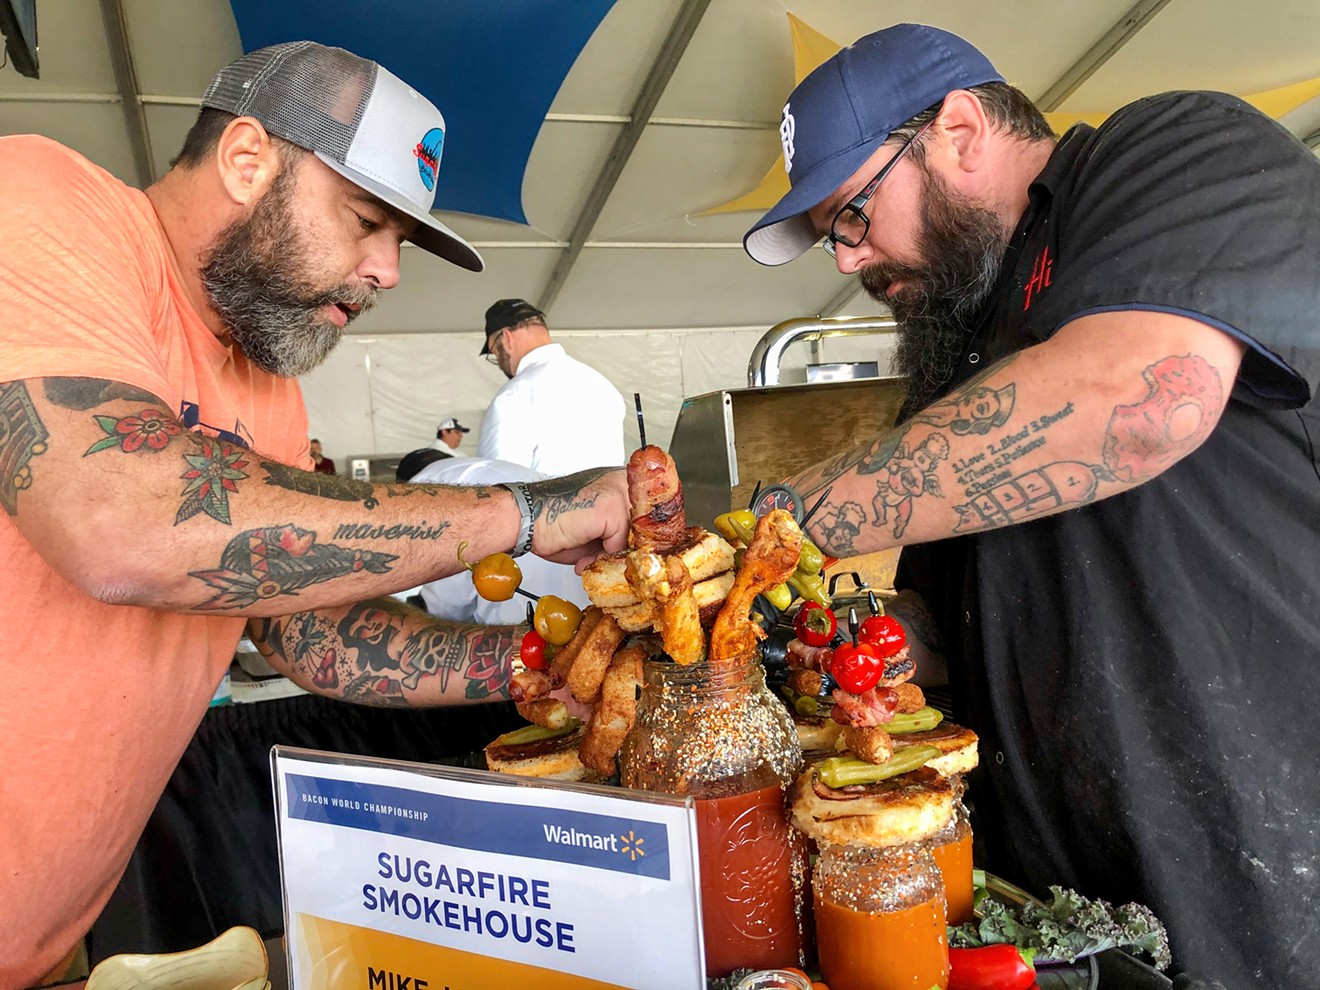 More than 1,500 chefs will compete this November at Fair Park.